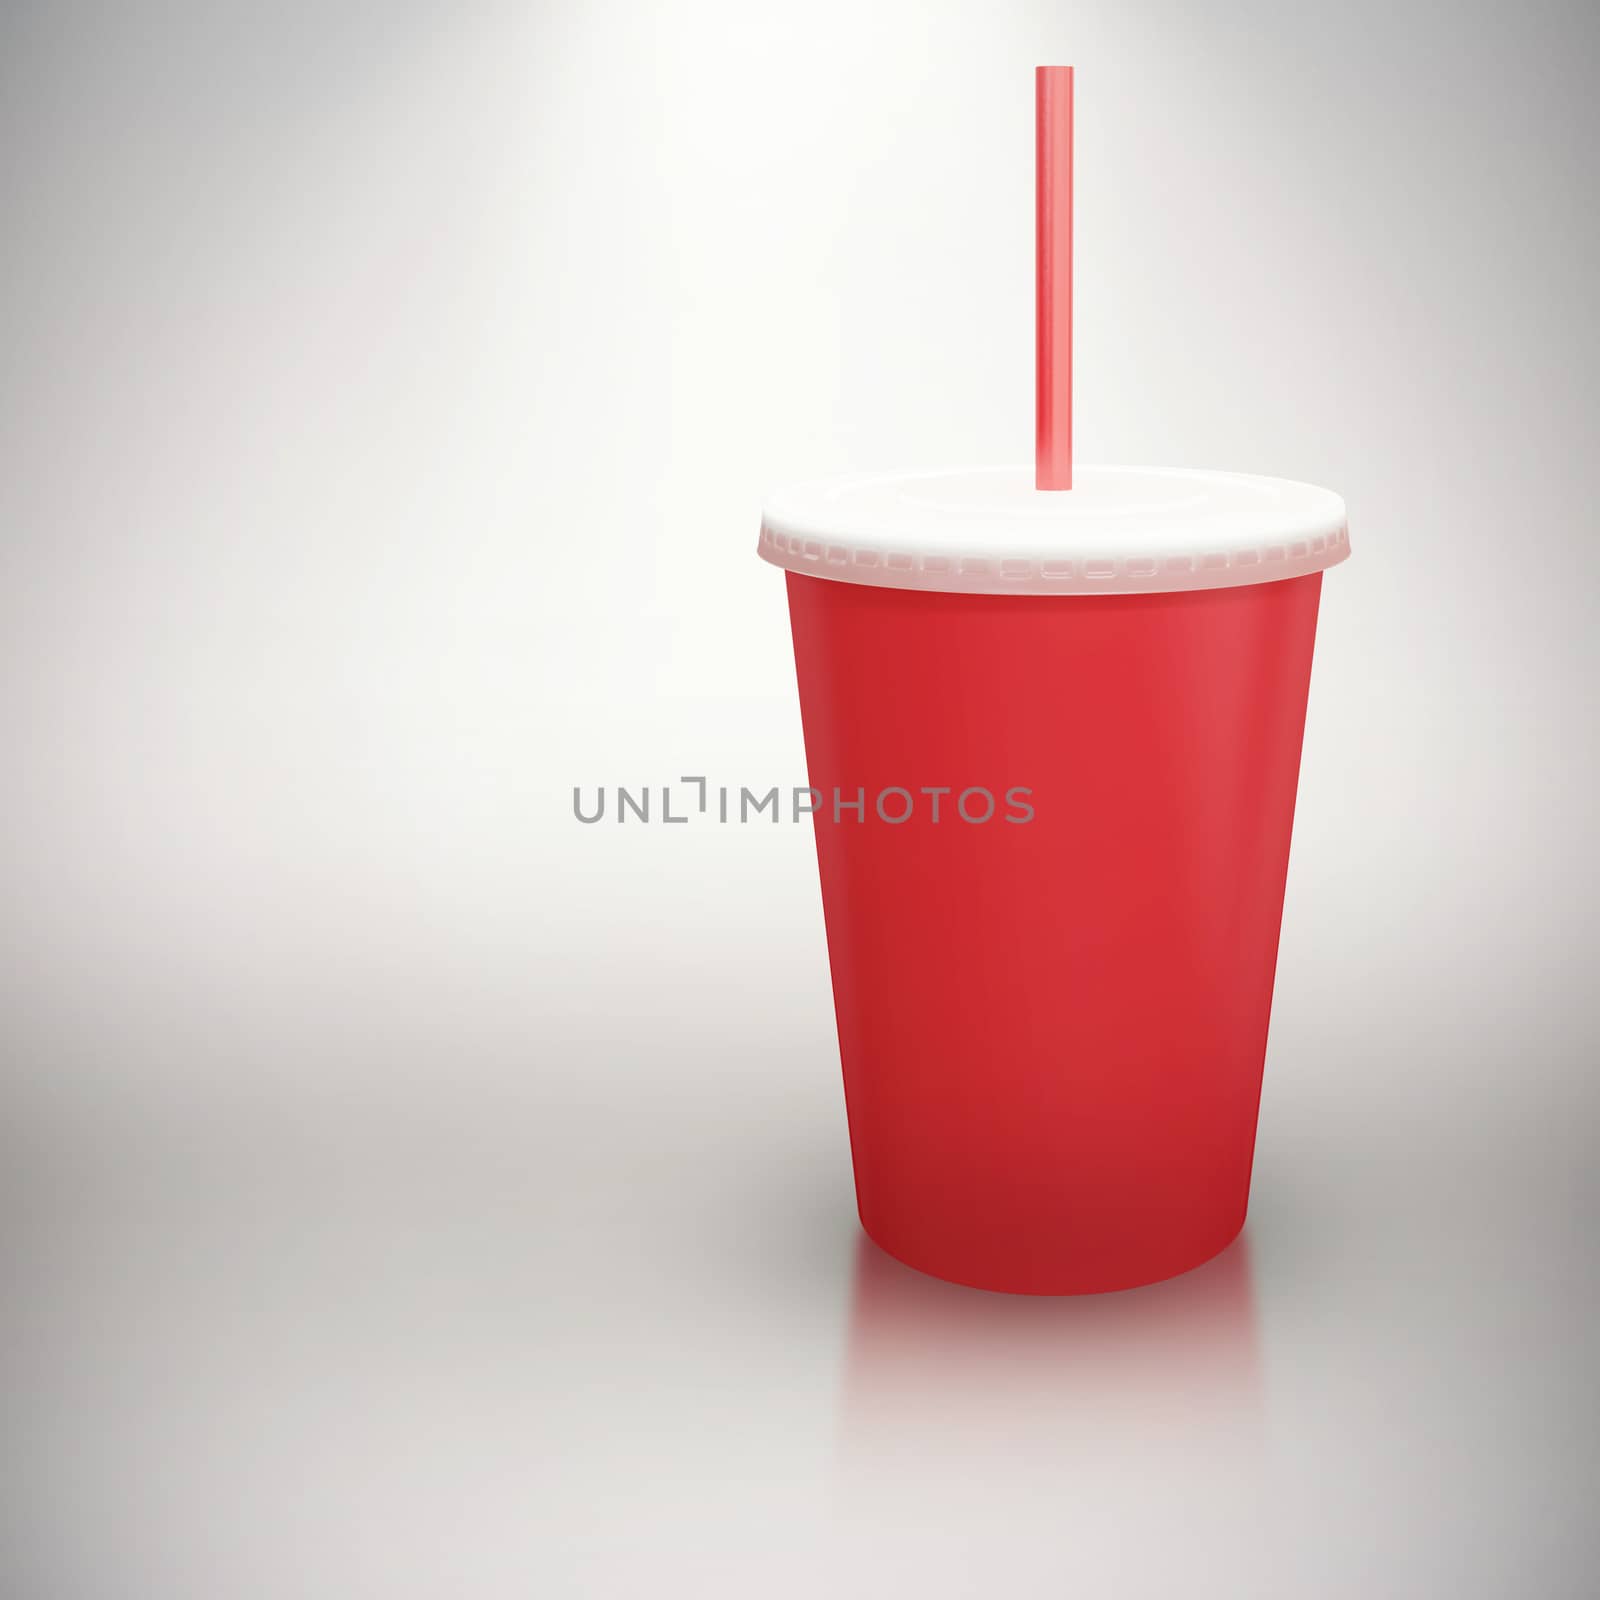 Composite image of red cup over white background by Wavebreakmedia